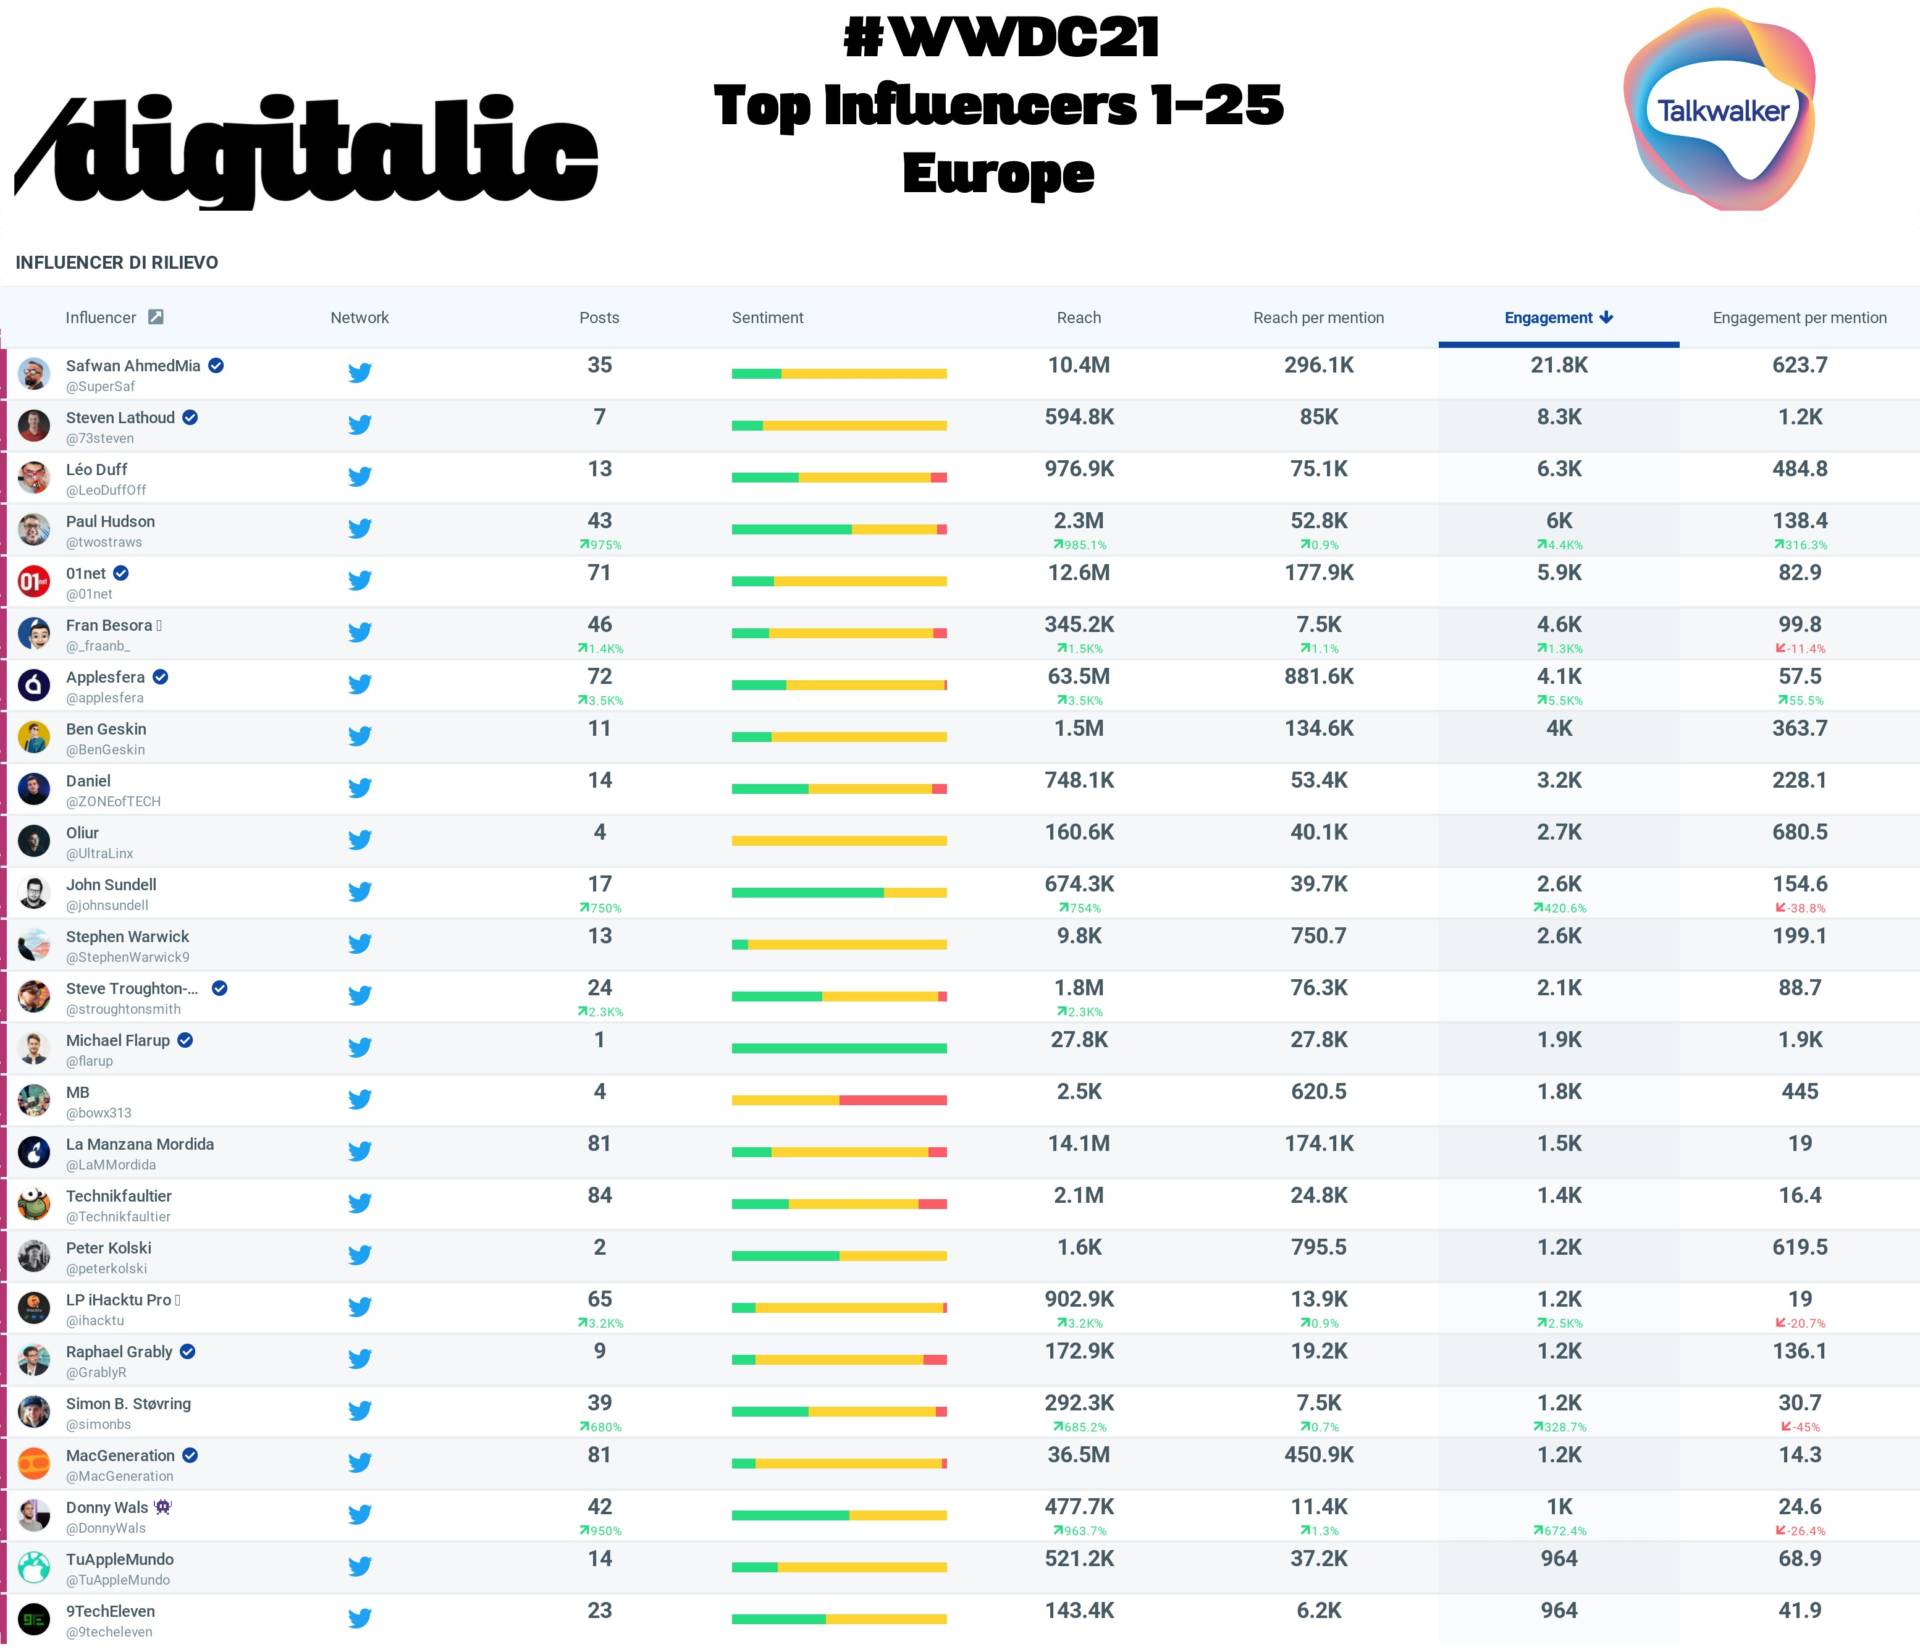 WWDC top influencers EUROPE 1-25